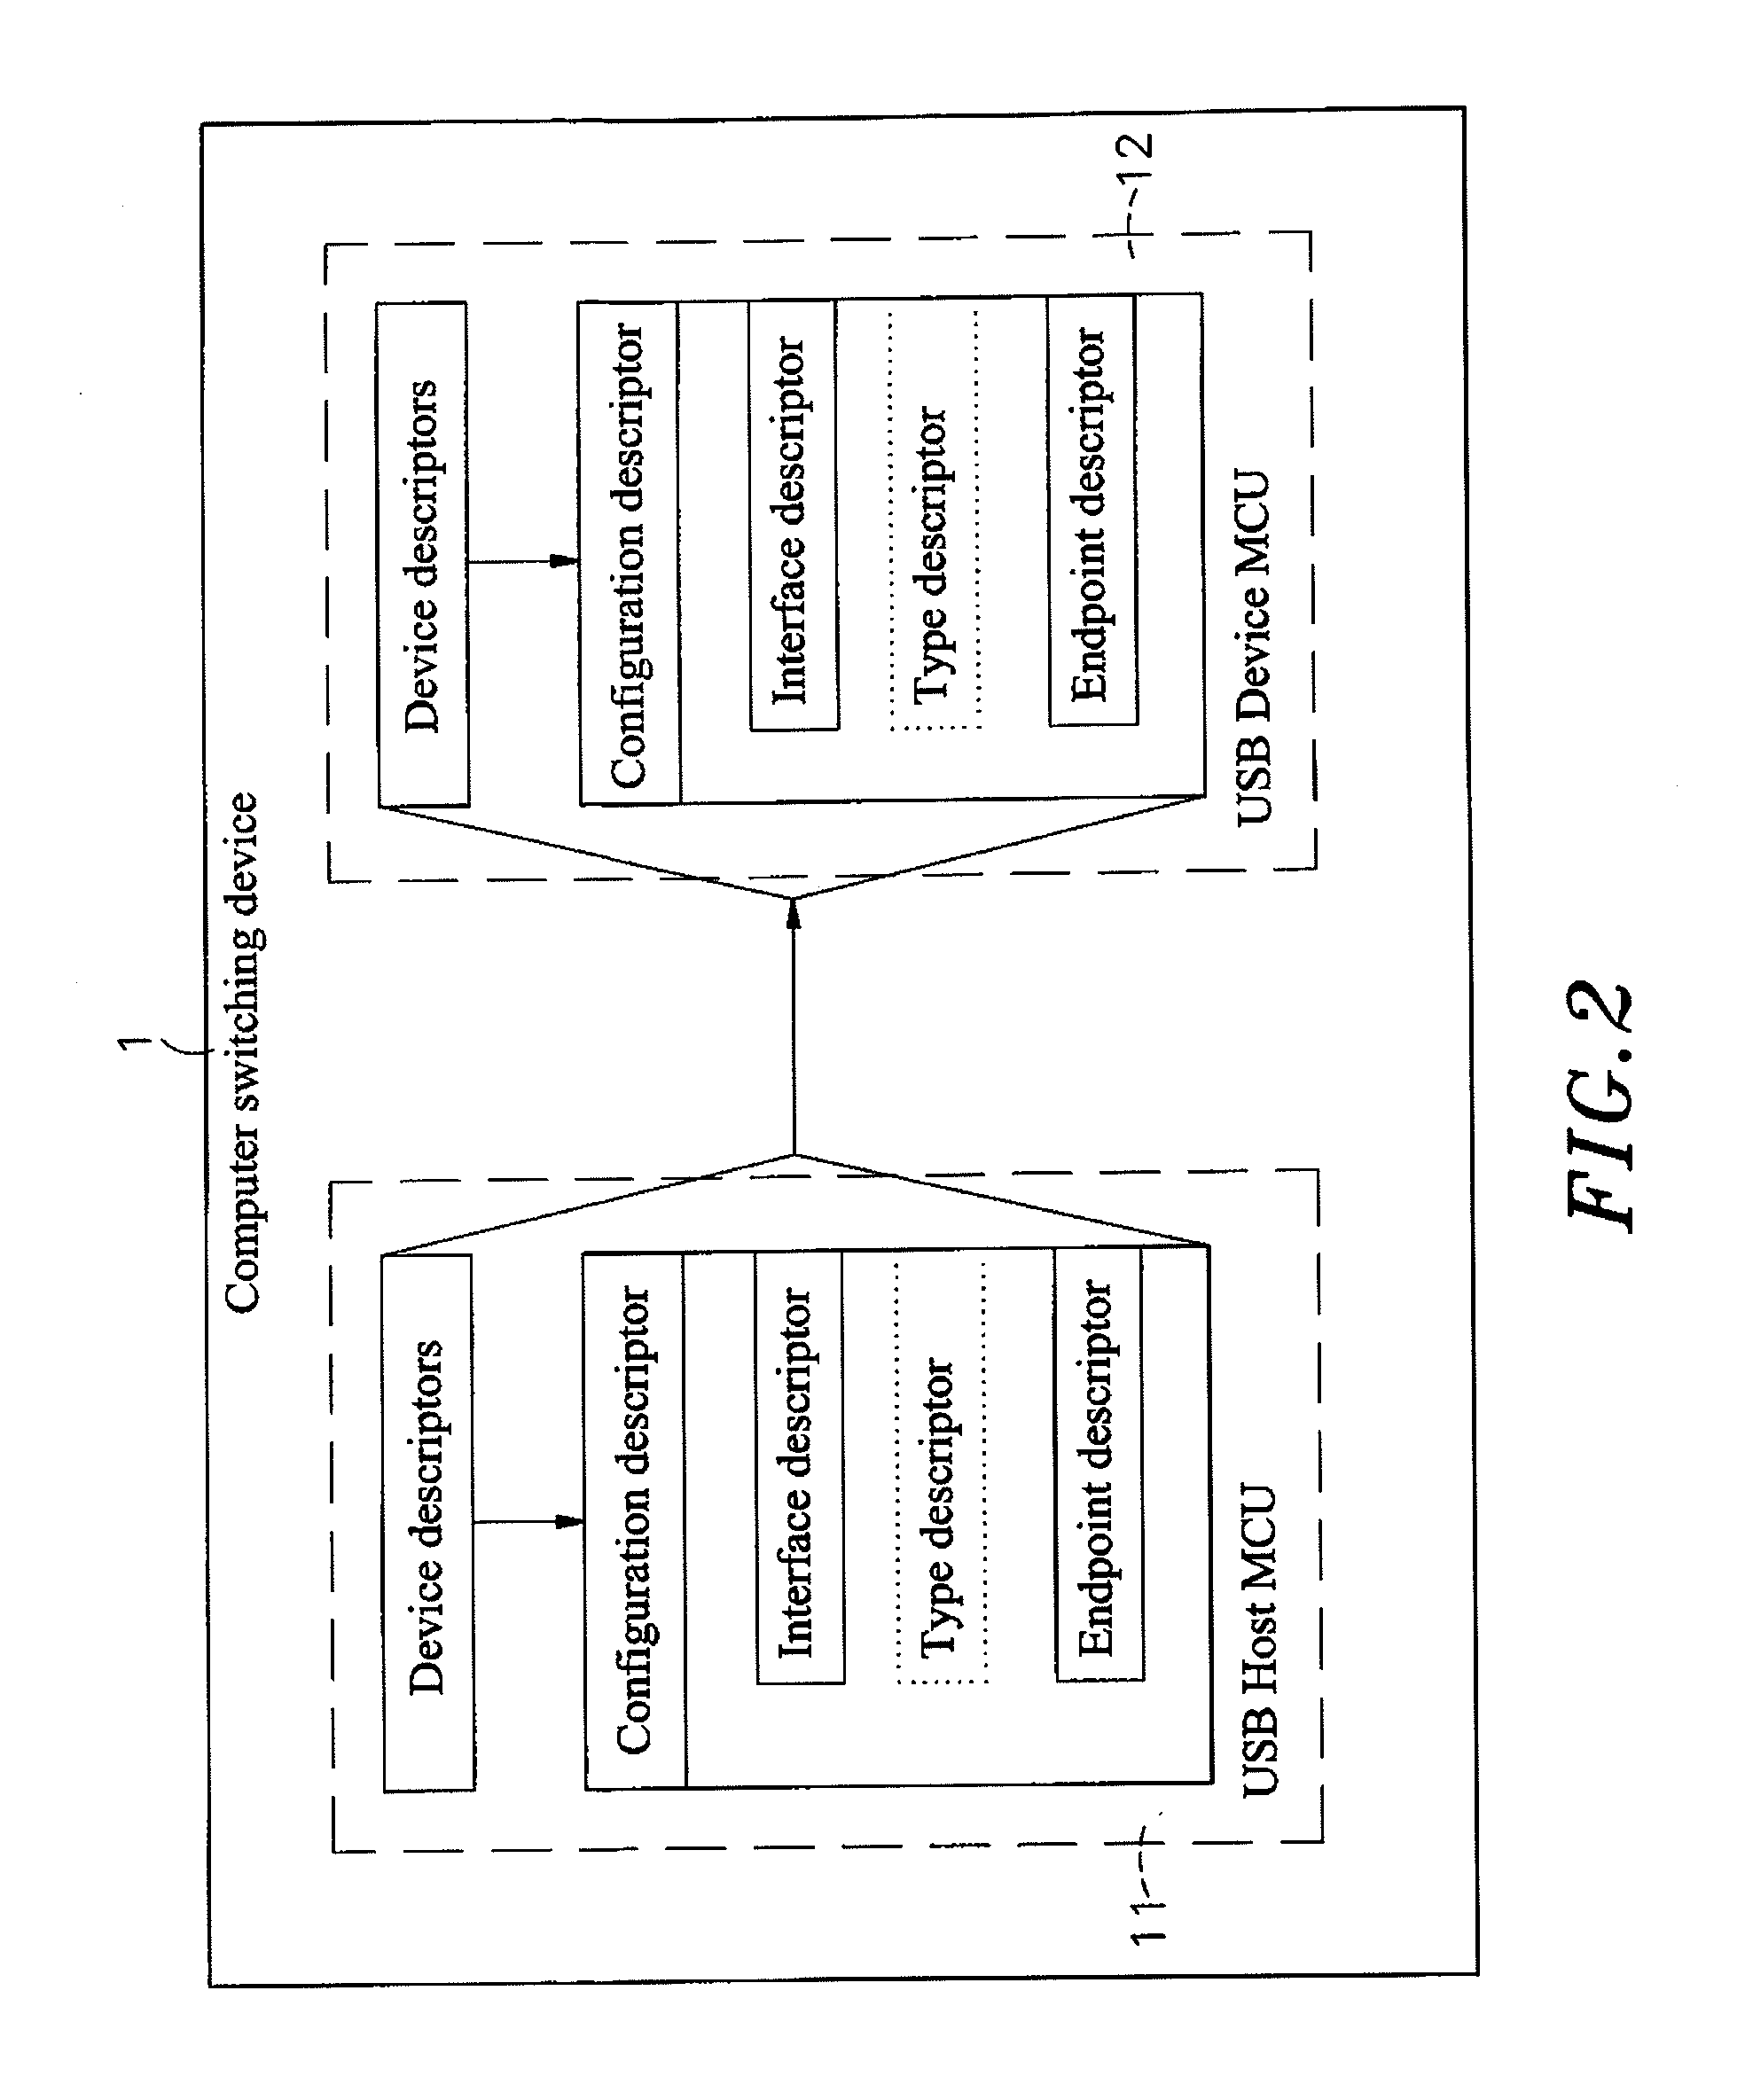 Method for automatic mapping and updating of computer switching devices